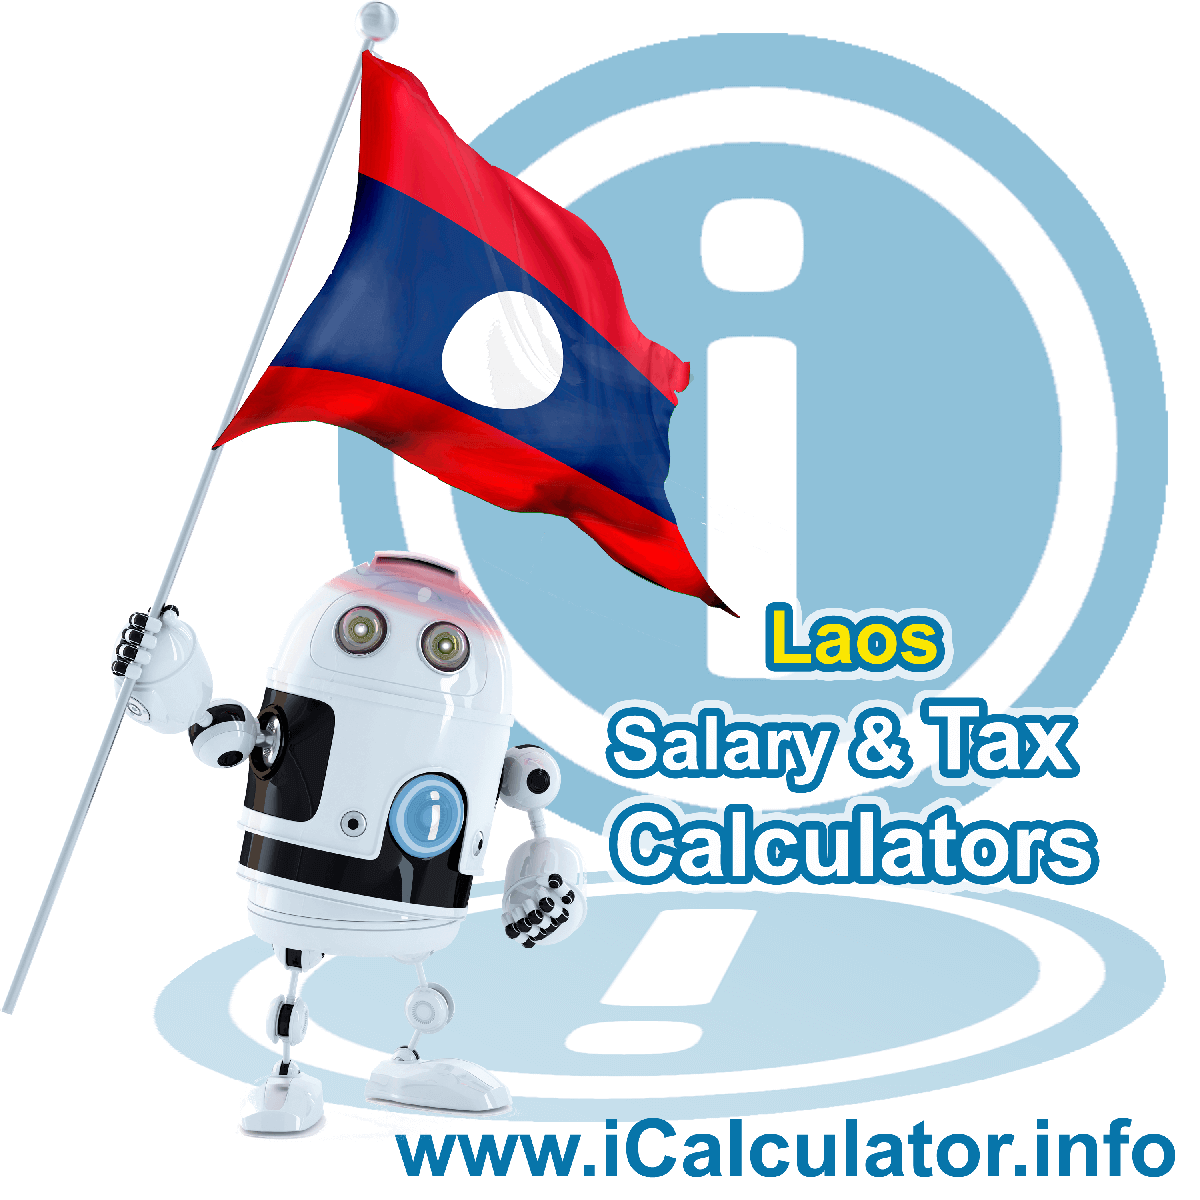 Lao Tax Calculator. This image shows the Lao flag and information relating to the tax formula for the Lao Salary Calculator